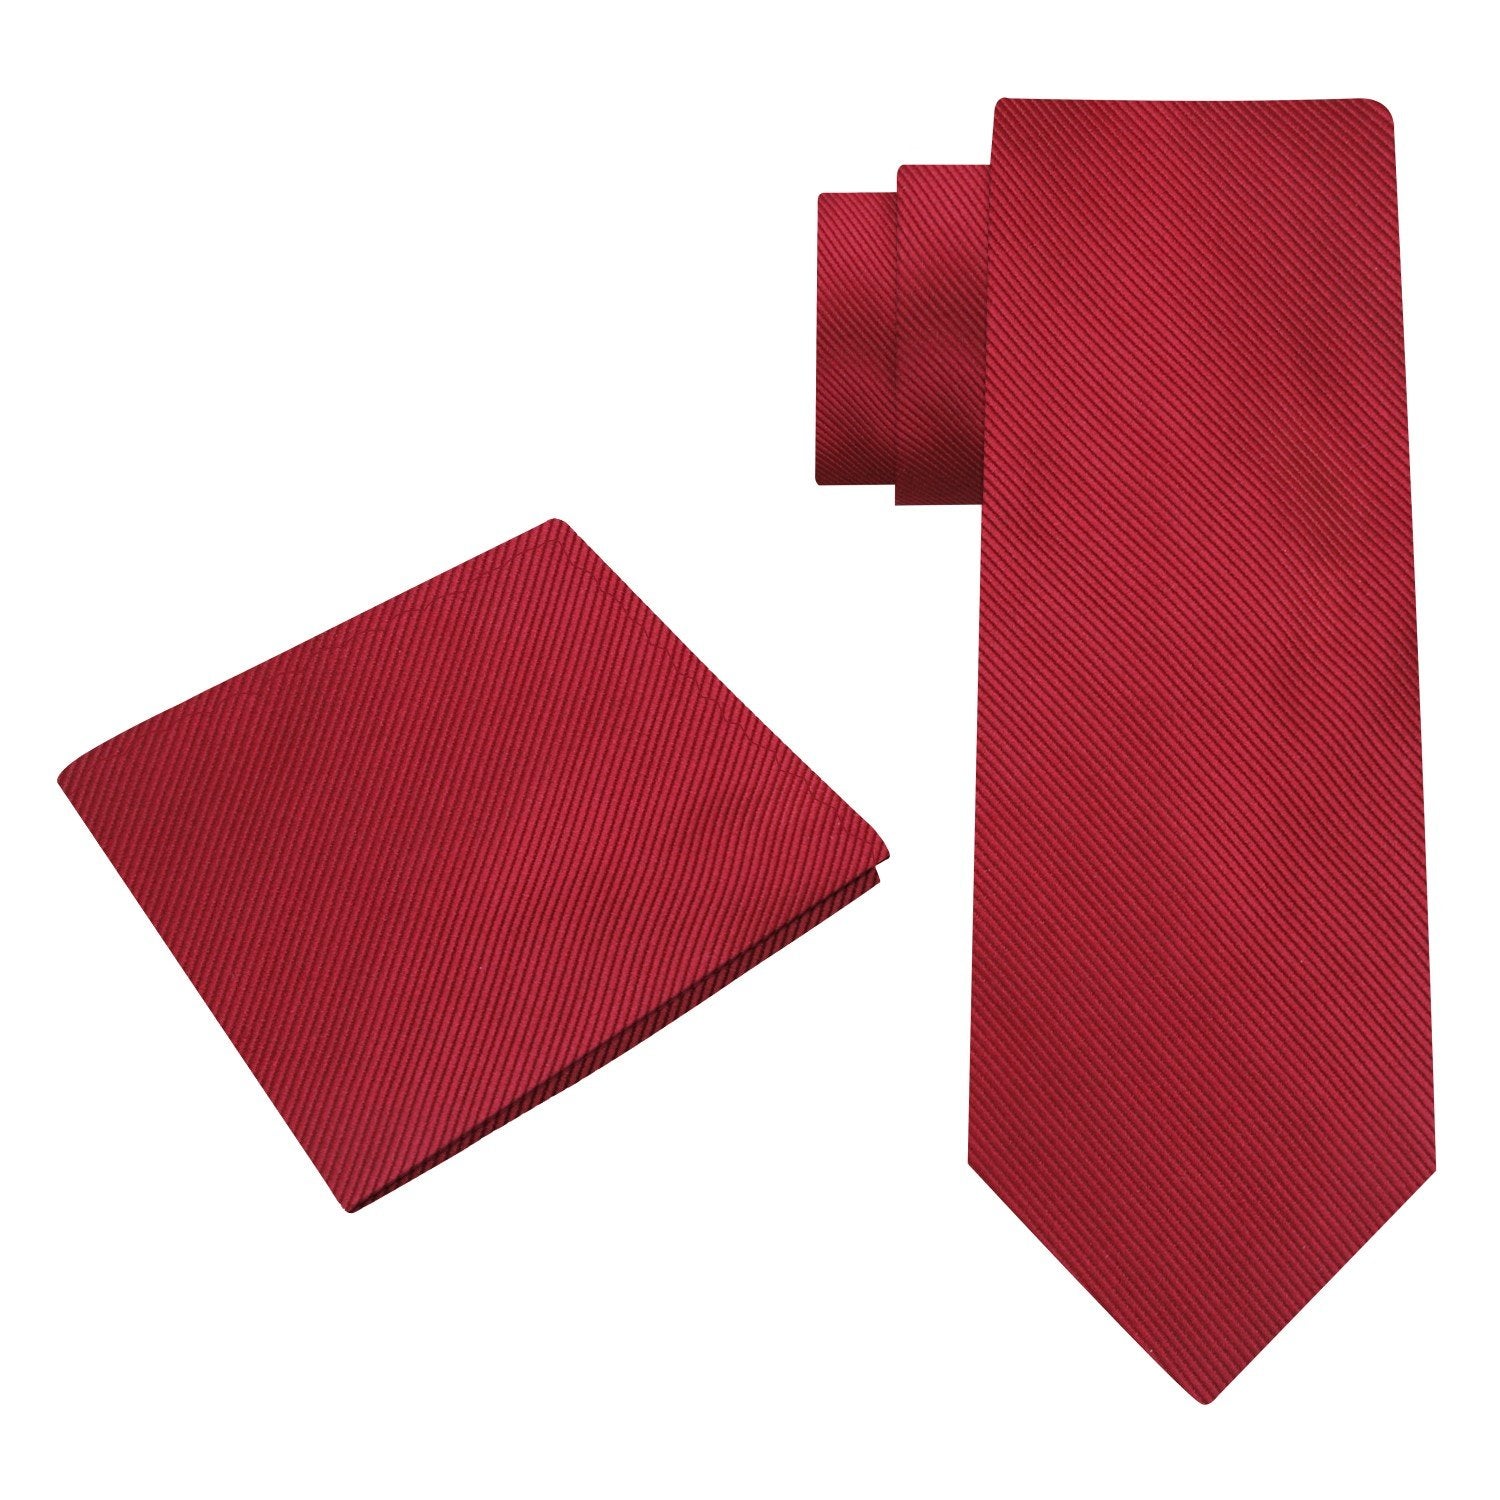 Alt View: Chili Red Tie and Pocket Square